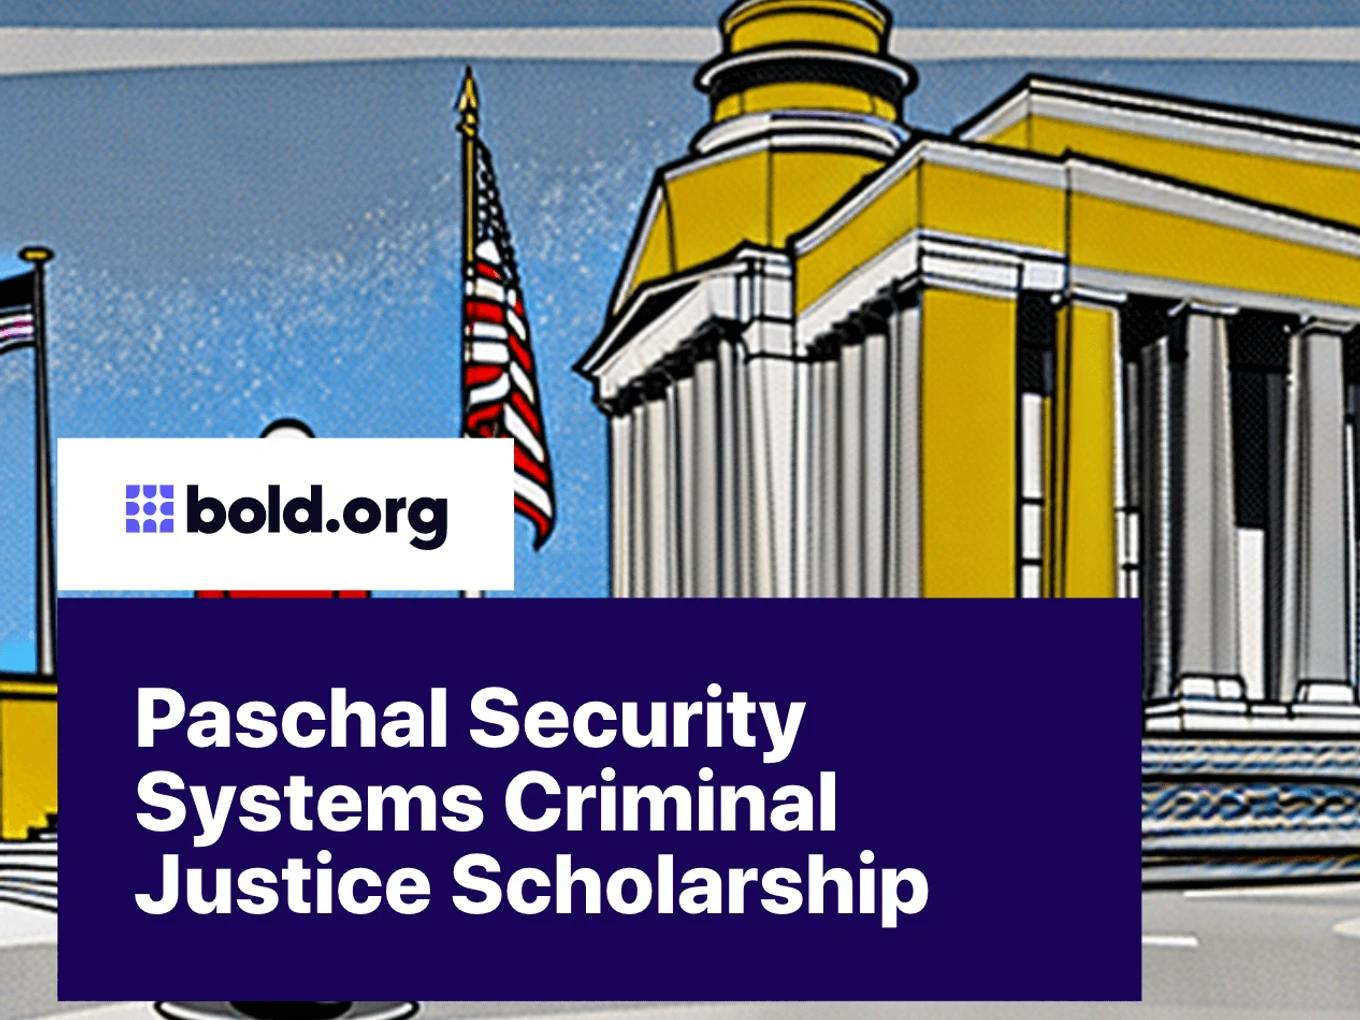 Paschal Security Systems Criminal Justice Scholarship